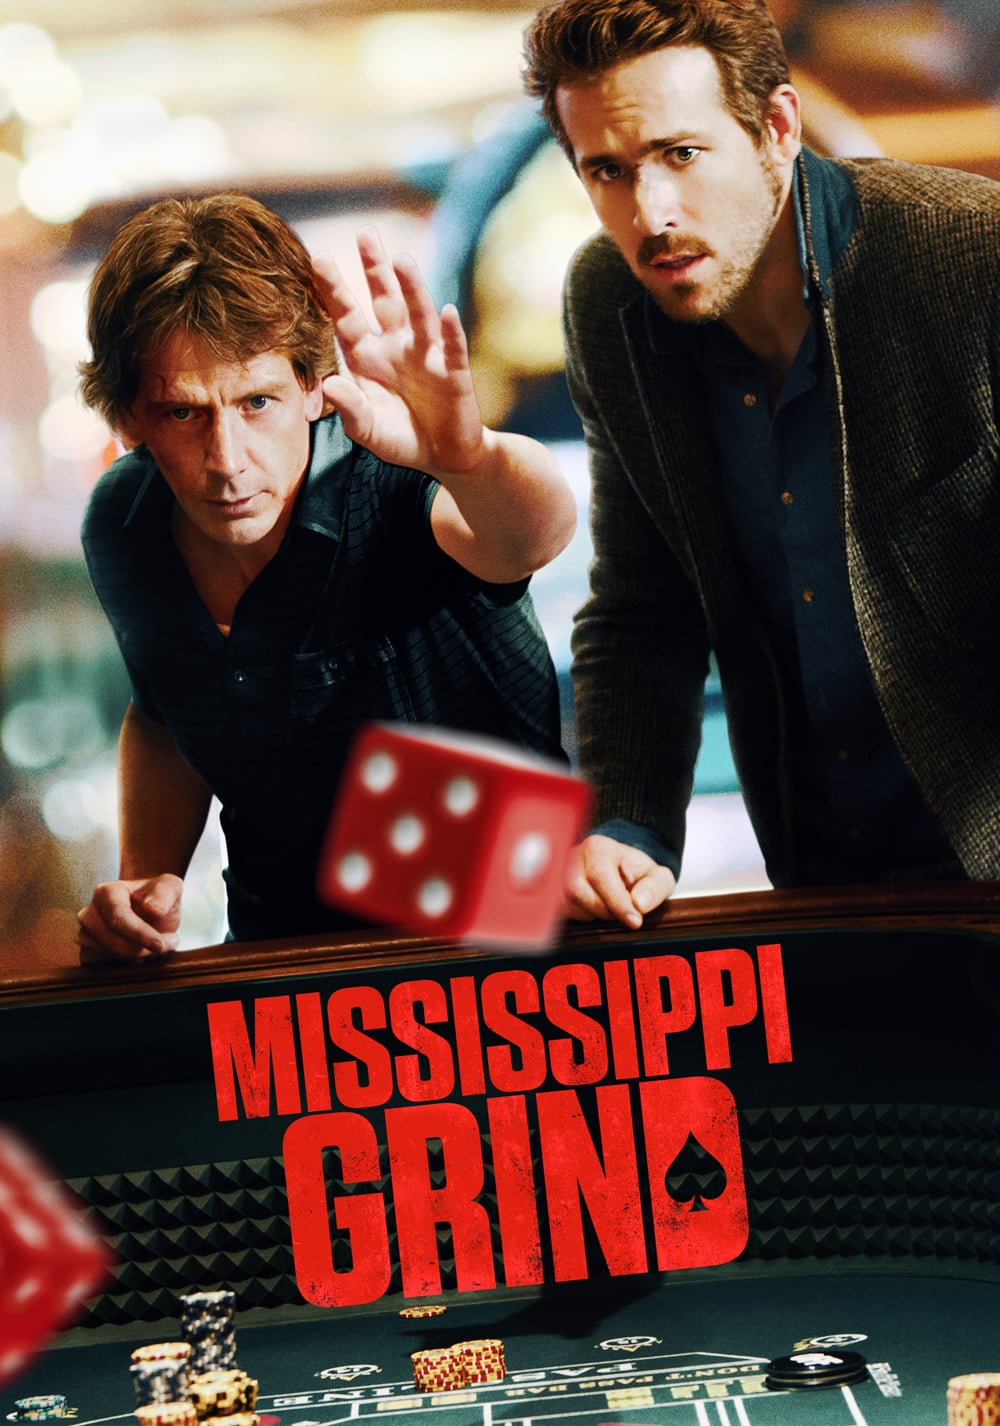 Poster for the movie "Mississippi Grind"